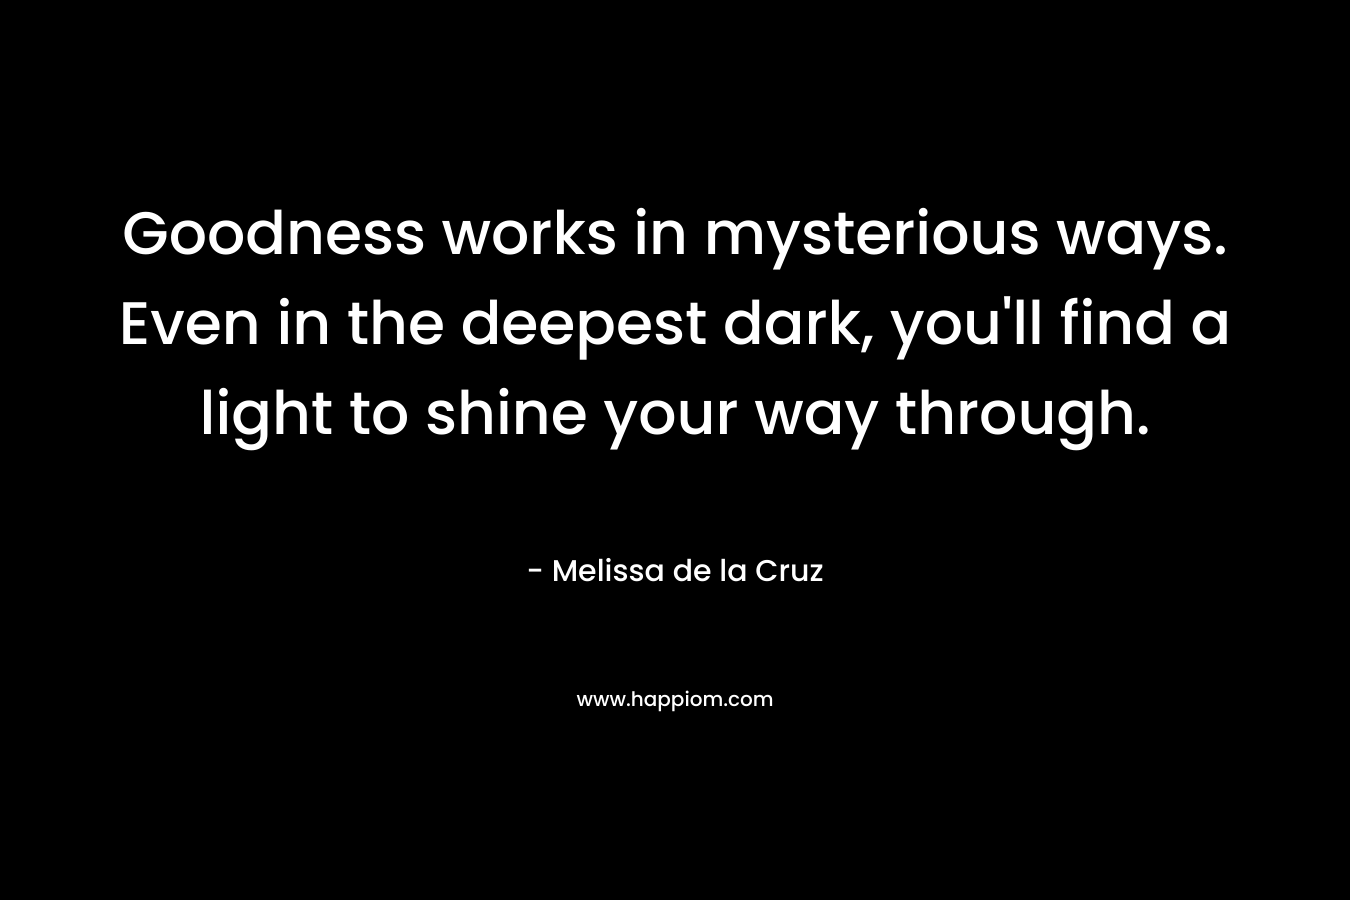 Goodness works in mysterious ways. Even in the deepest dark, you'll find a light to shine your way through.